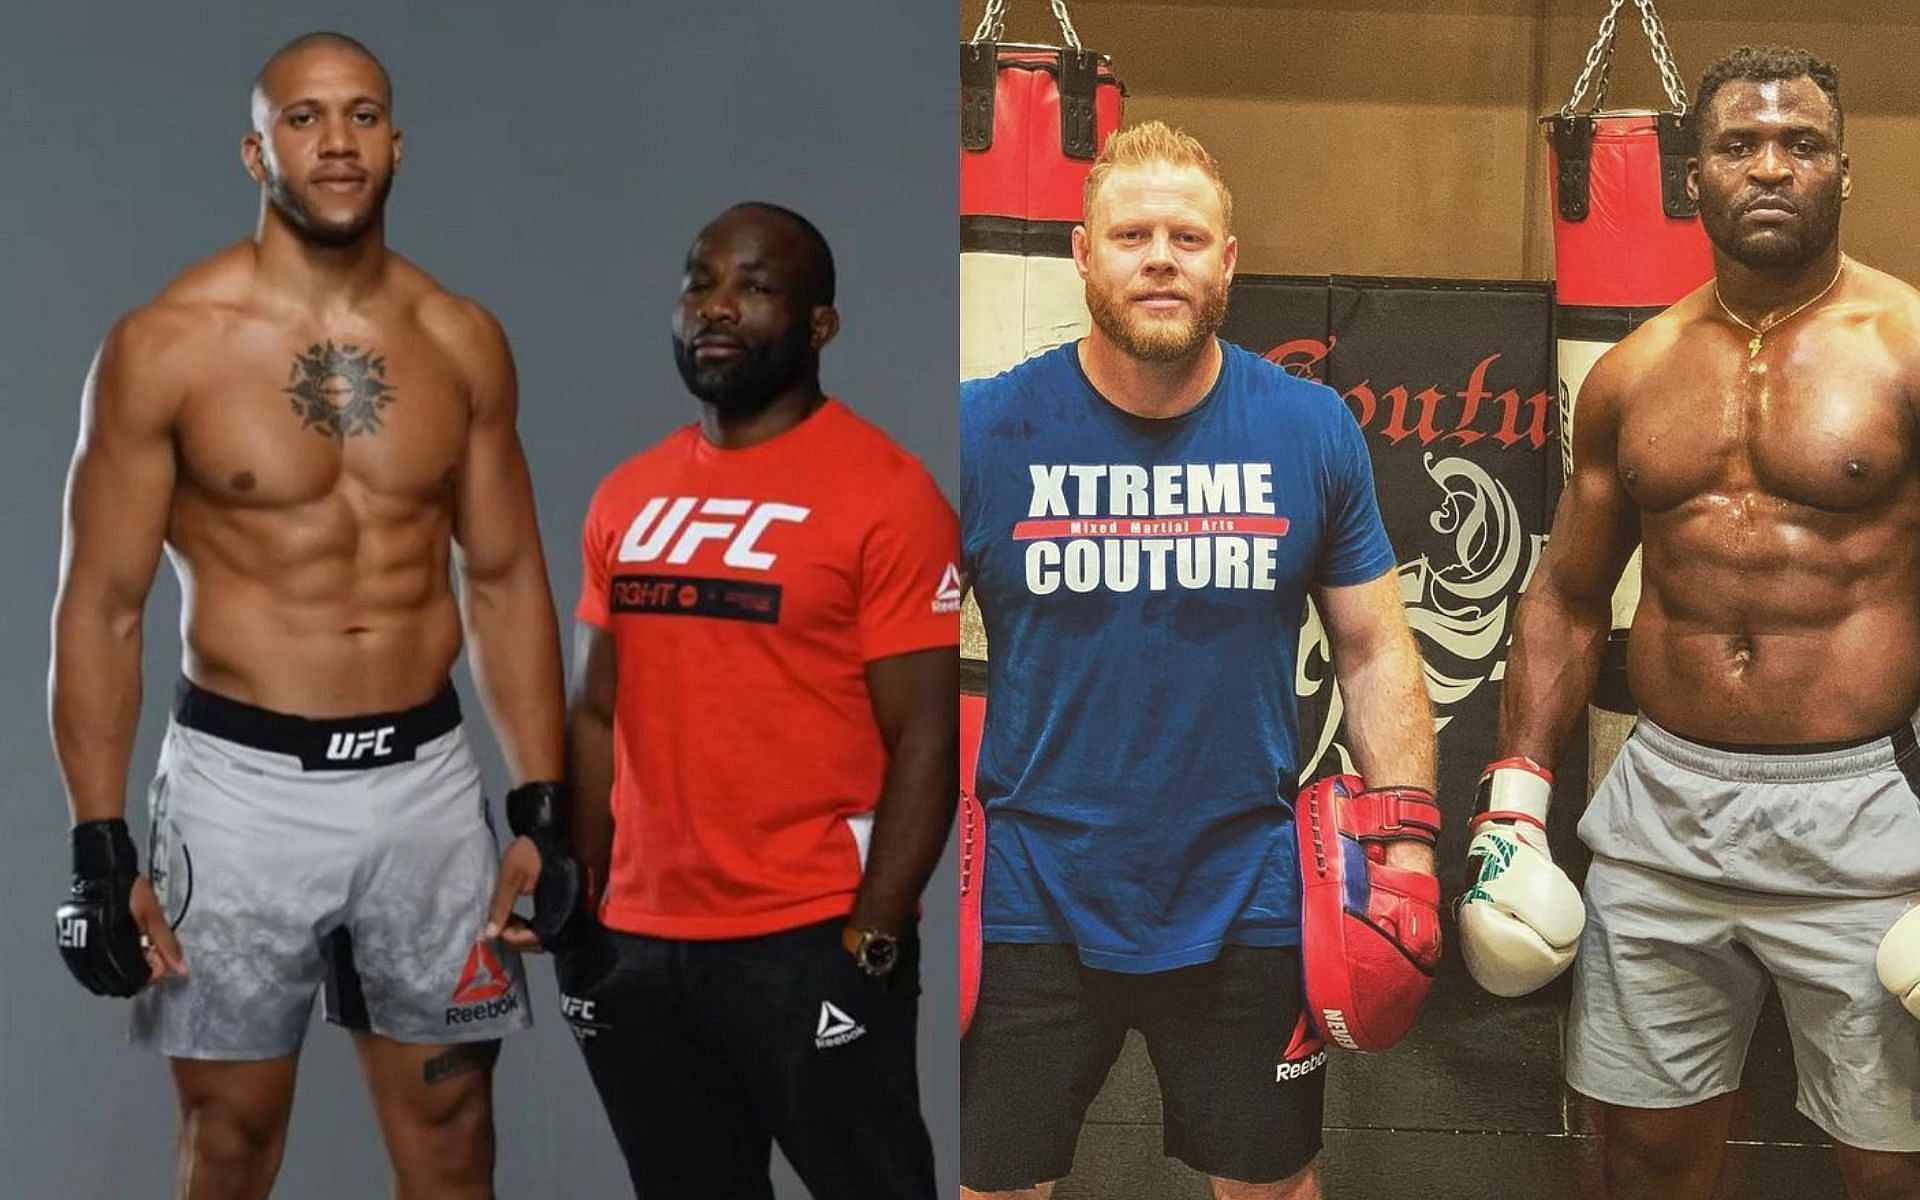 Ciryl Gane with Fernand Lopez (Left) and Francis Ngannou with Erik Nicksick (Right) [Images via @lopez_fernand and @eric_xcmma on Instagram]